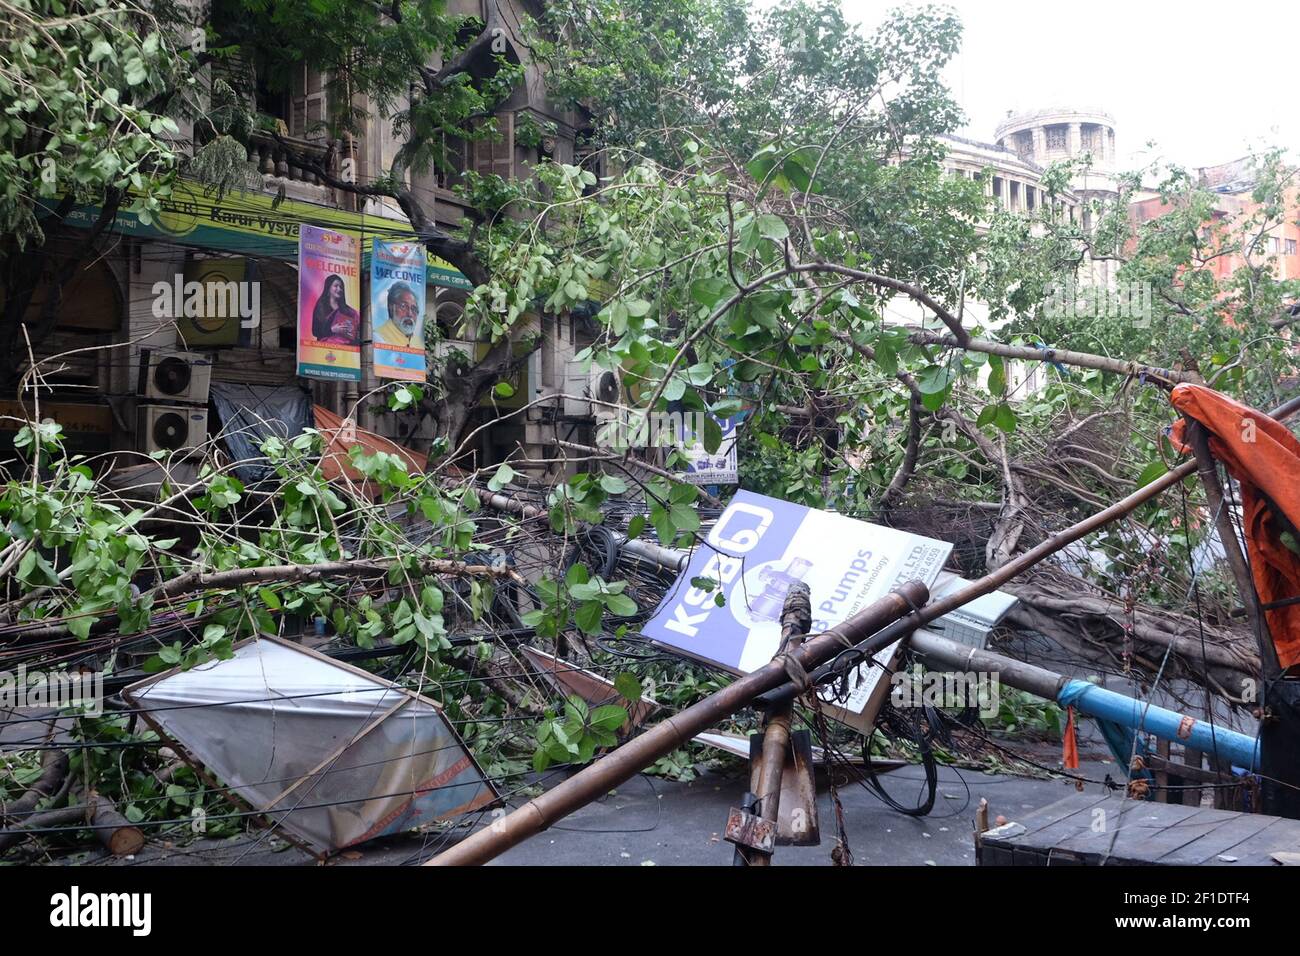 Uprooted trees are seen over the electrical wires in Kolkata, the state capital, authorities struggled to remove debris from roads and clear trees that fell as the cyclone, packing winds of 133 km (83 miles) per hour, pounded the city of 14 million for hours. (Photo by Satyajit Shaw/Pacific Press/Sipa USA) Stock Photo